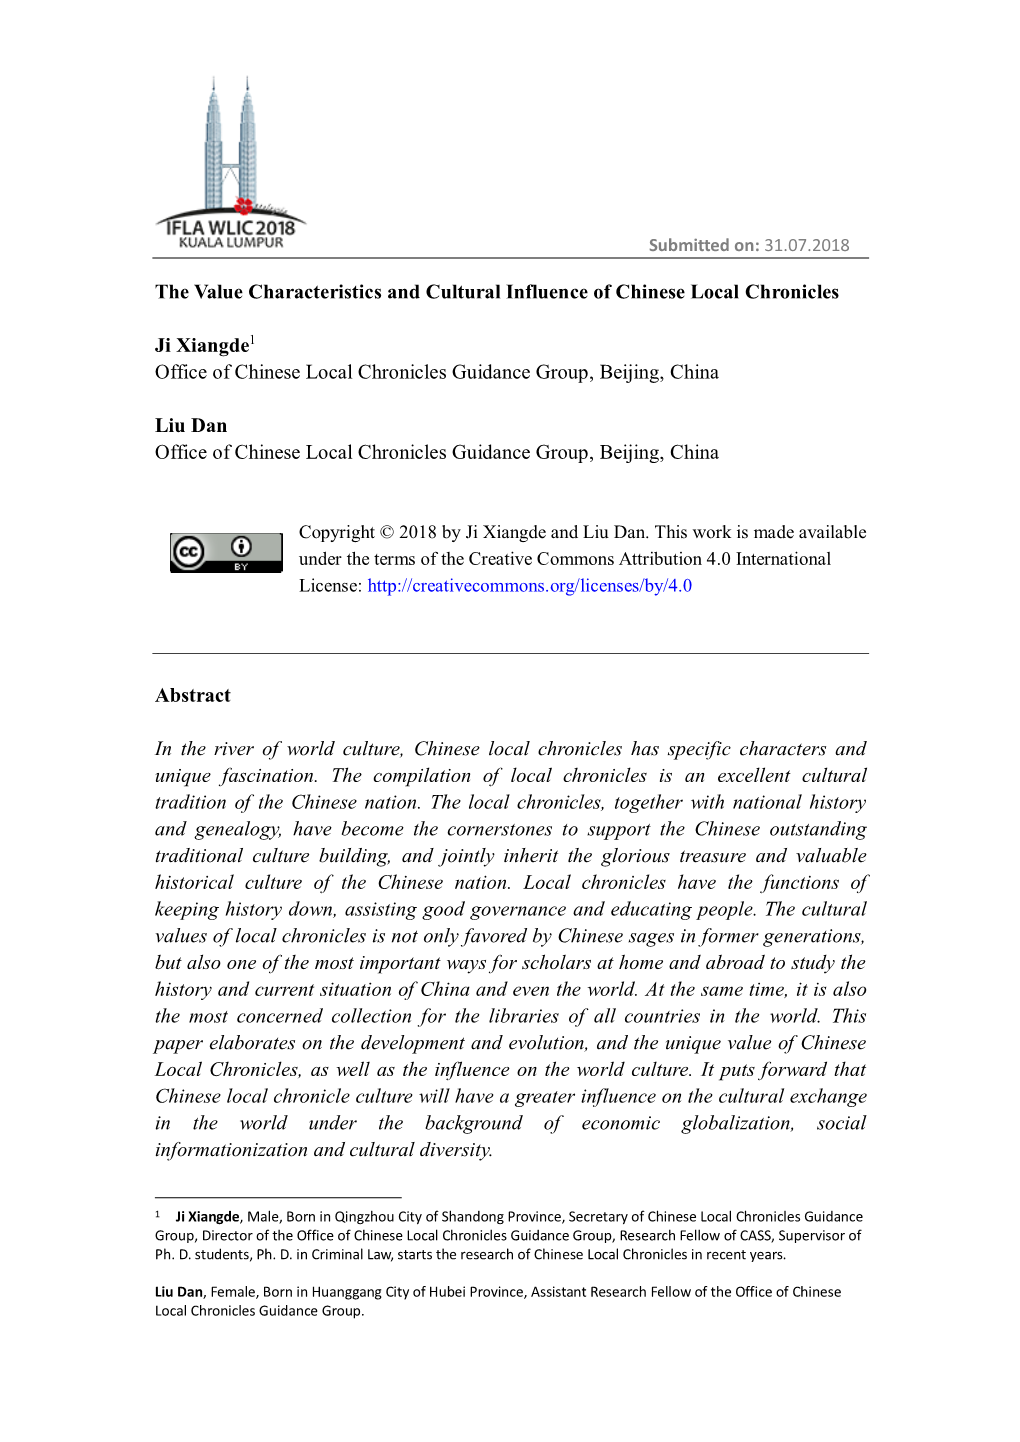 The Value Characteristics and Cultural Influence of Chinese Local Chronicles